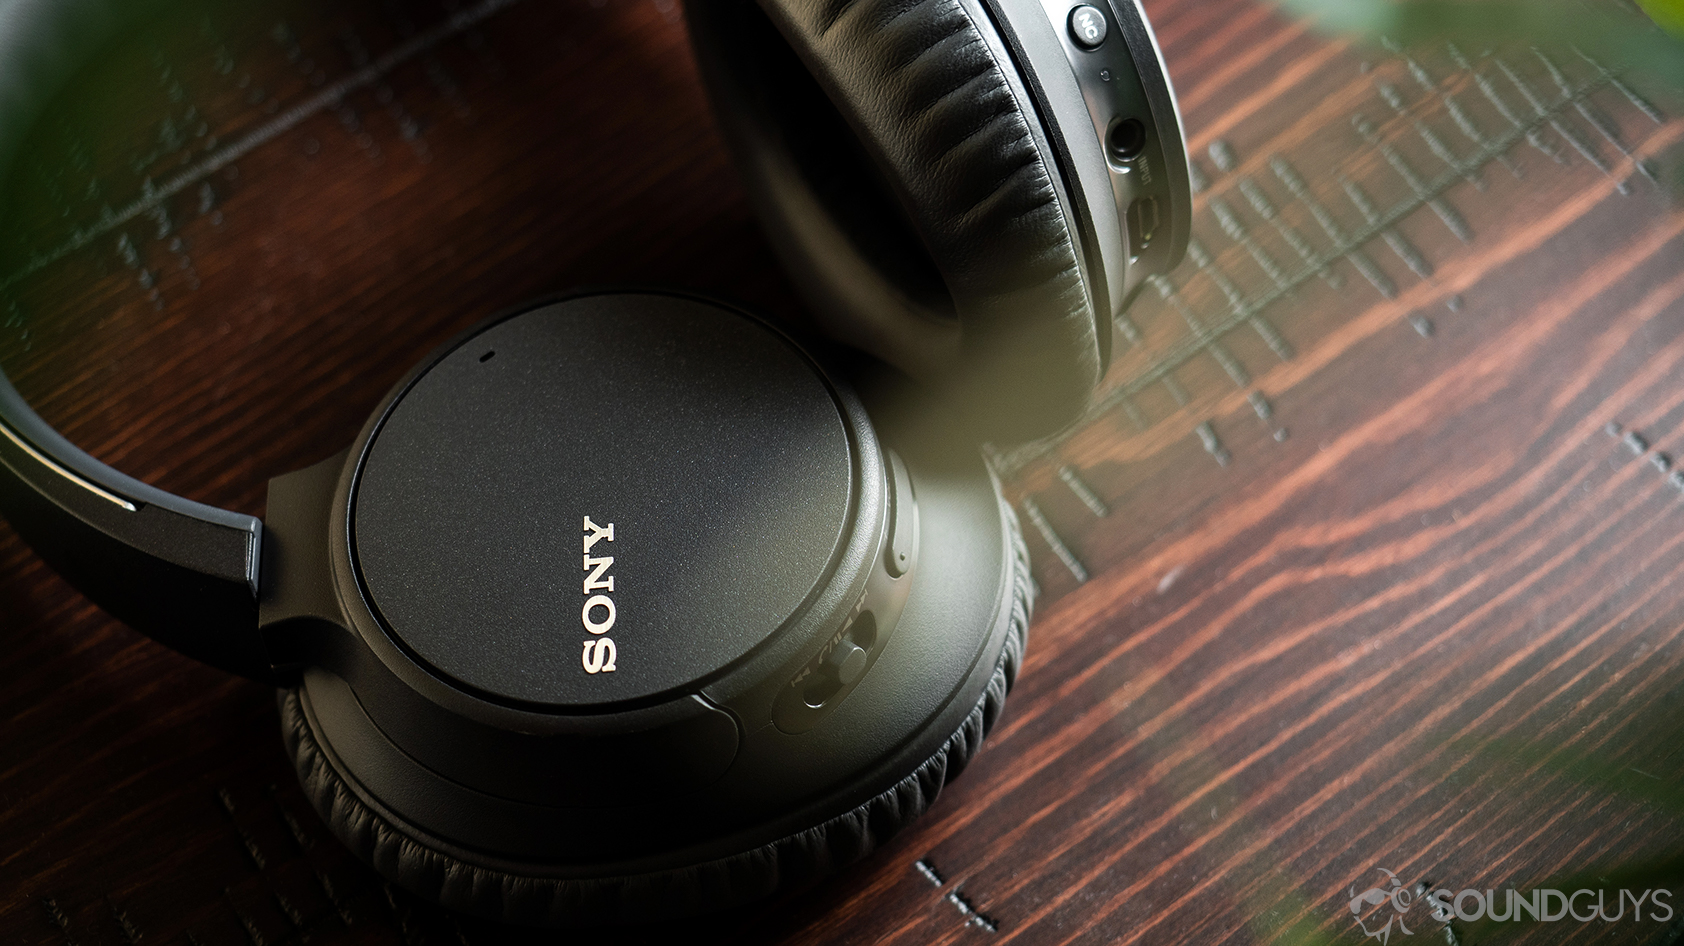 Sony WH-CH700N headphones on a cherry wood surface.